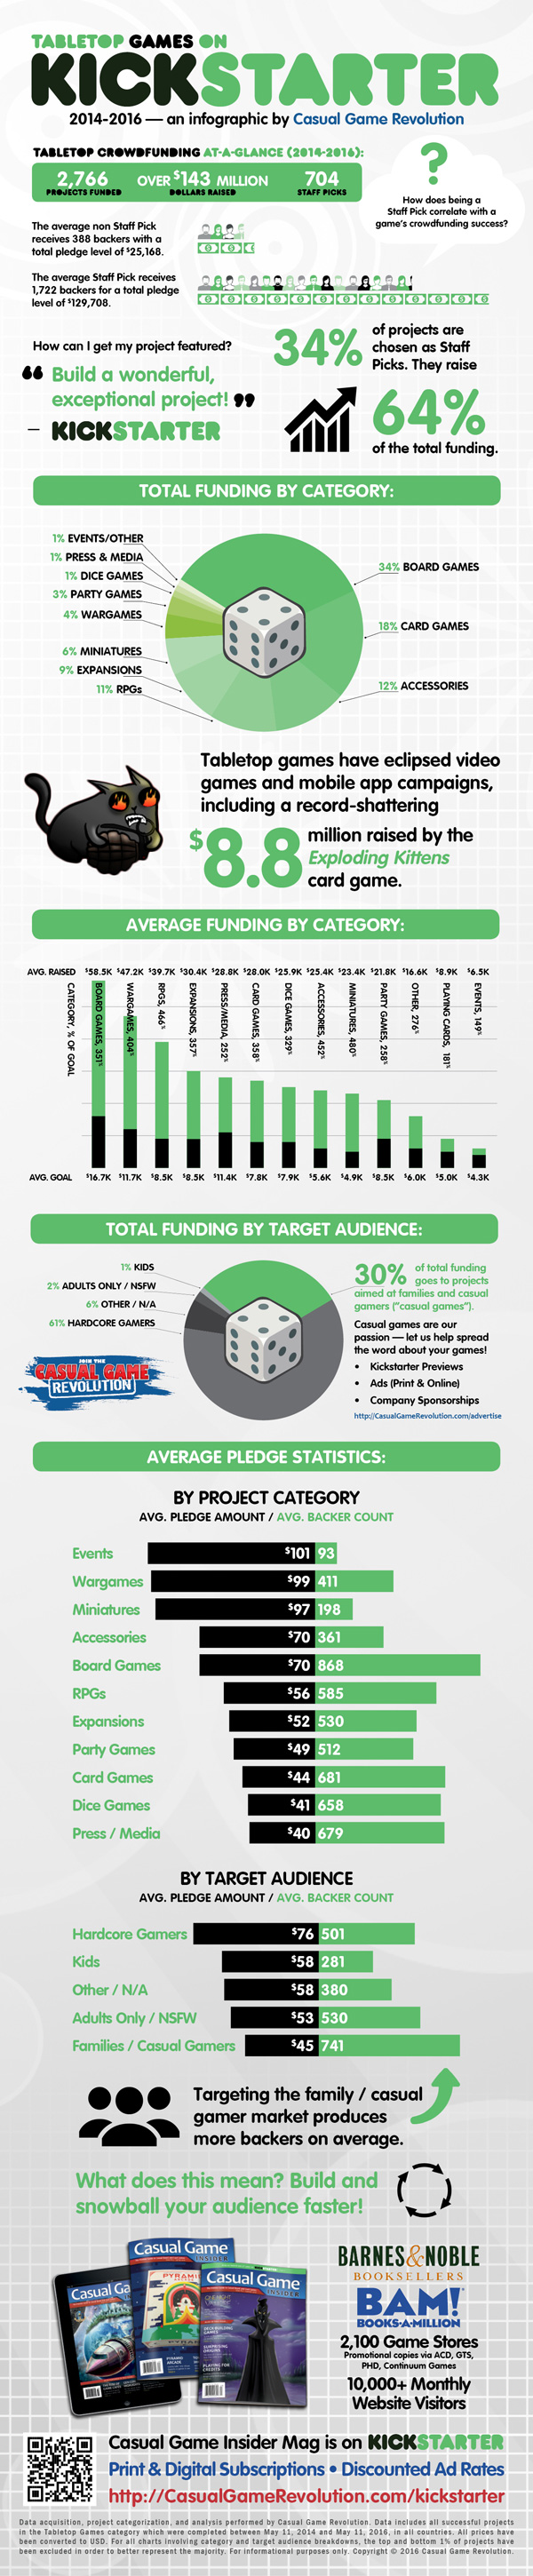 Tabletop Games on Kickstarter 2014-2016 Infographic - Courtesy Casual Game Revolution